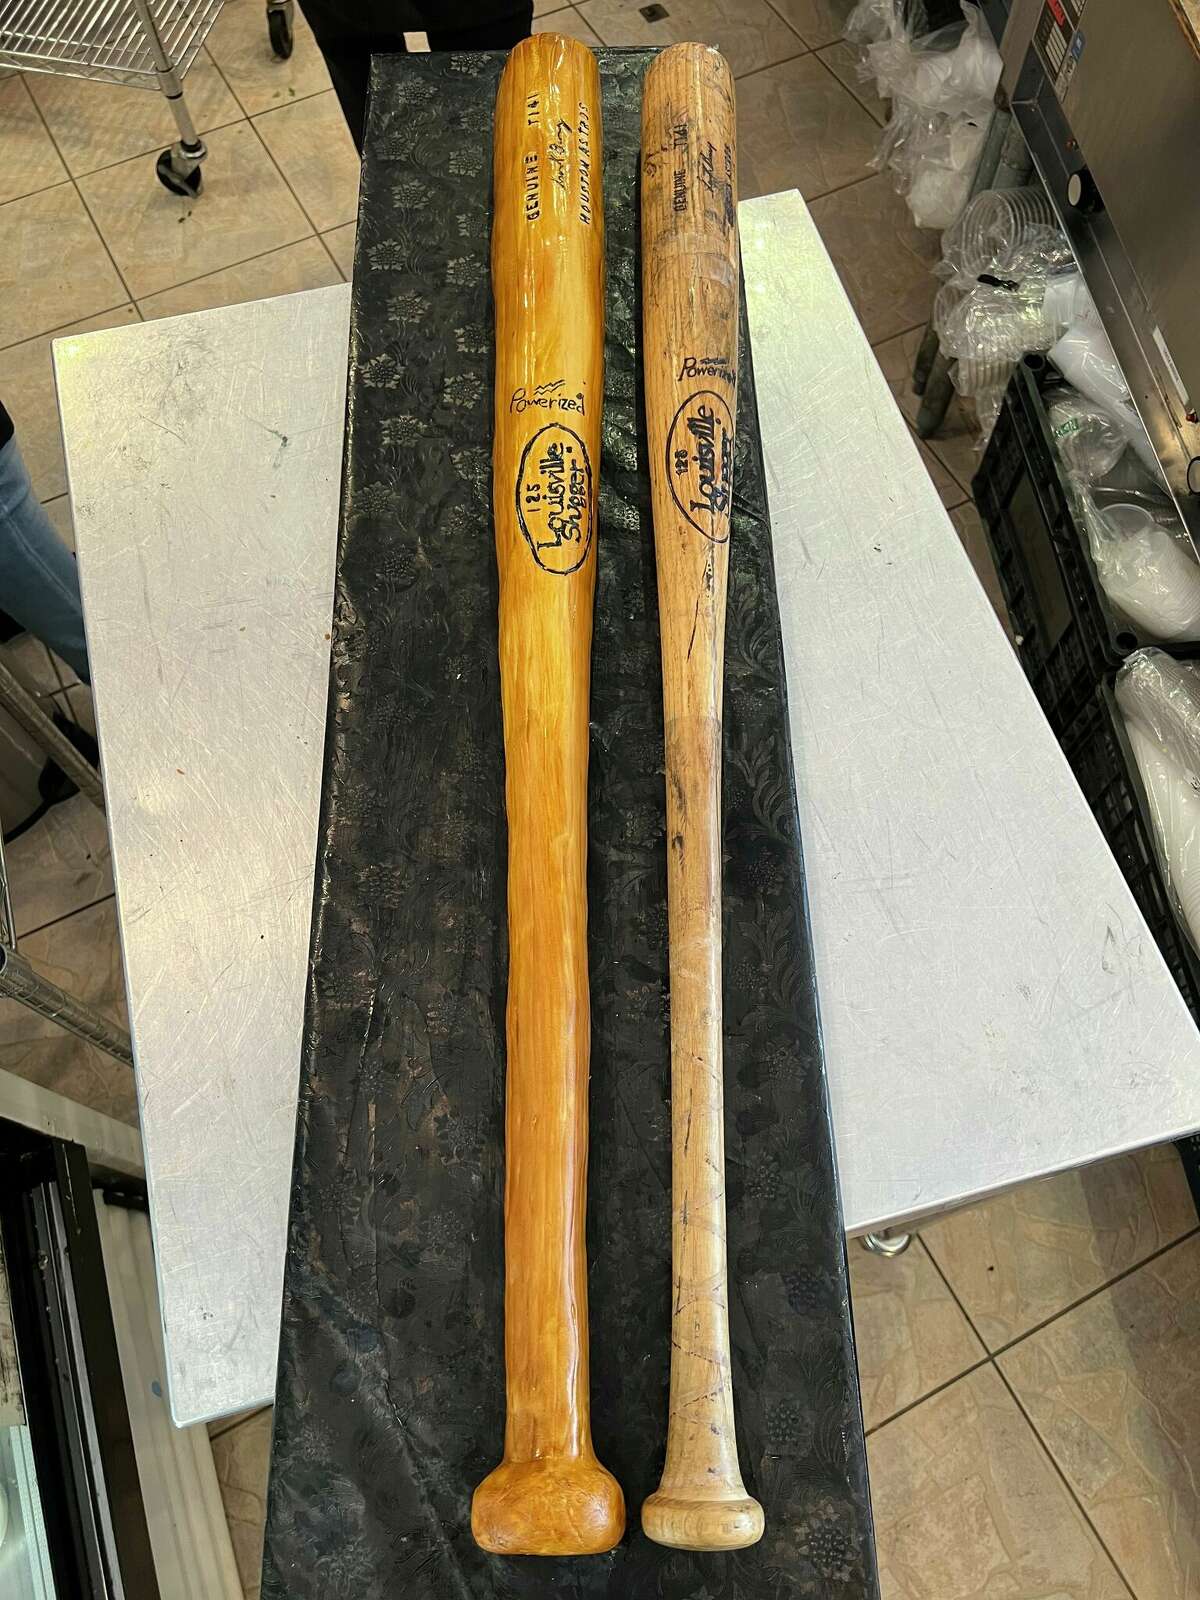 A customer requested Rustika Café and Bakery create a cake replica of a Houston Astros baseball bat for a private event in or near Friendswood.